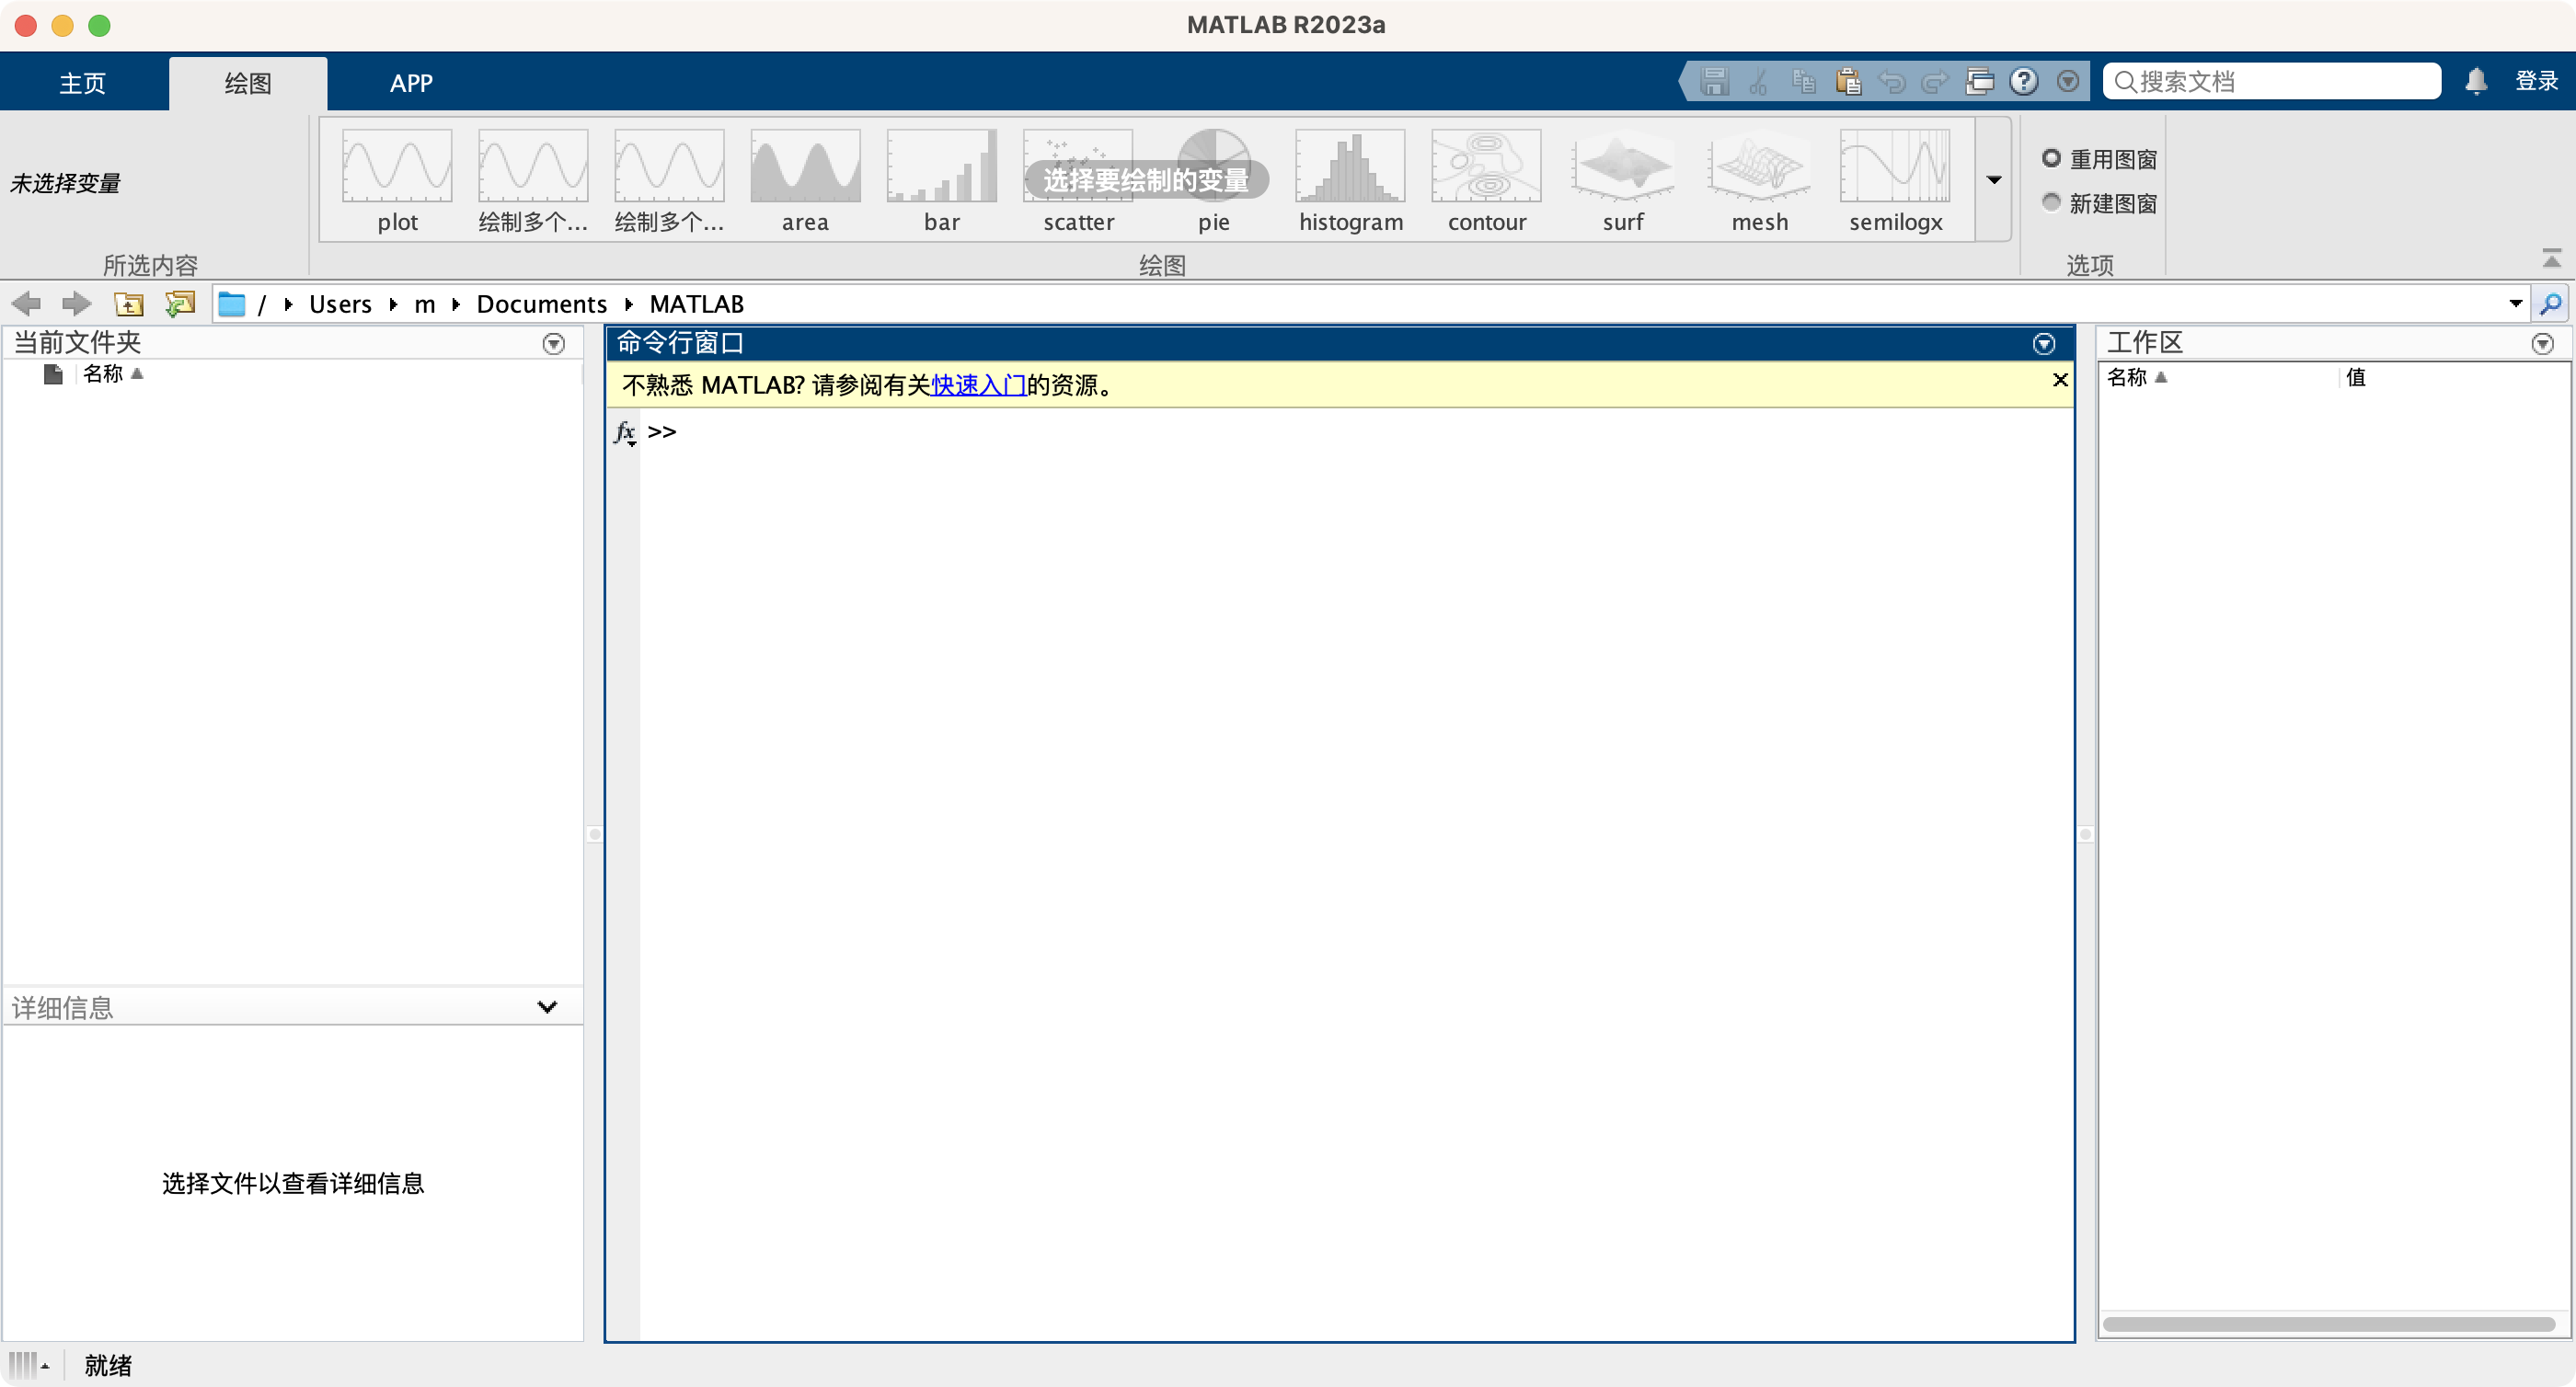 MathWorks MATLAB R2023a 9.14.0.2337262 for iphone download